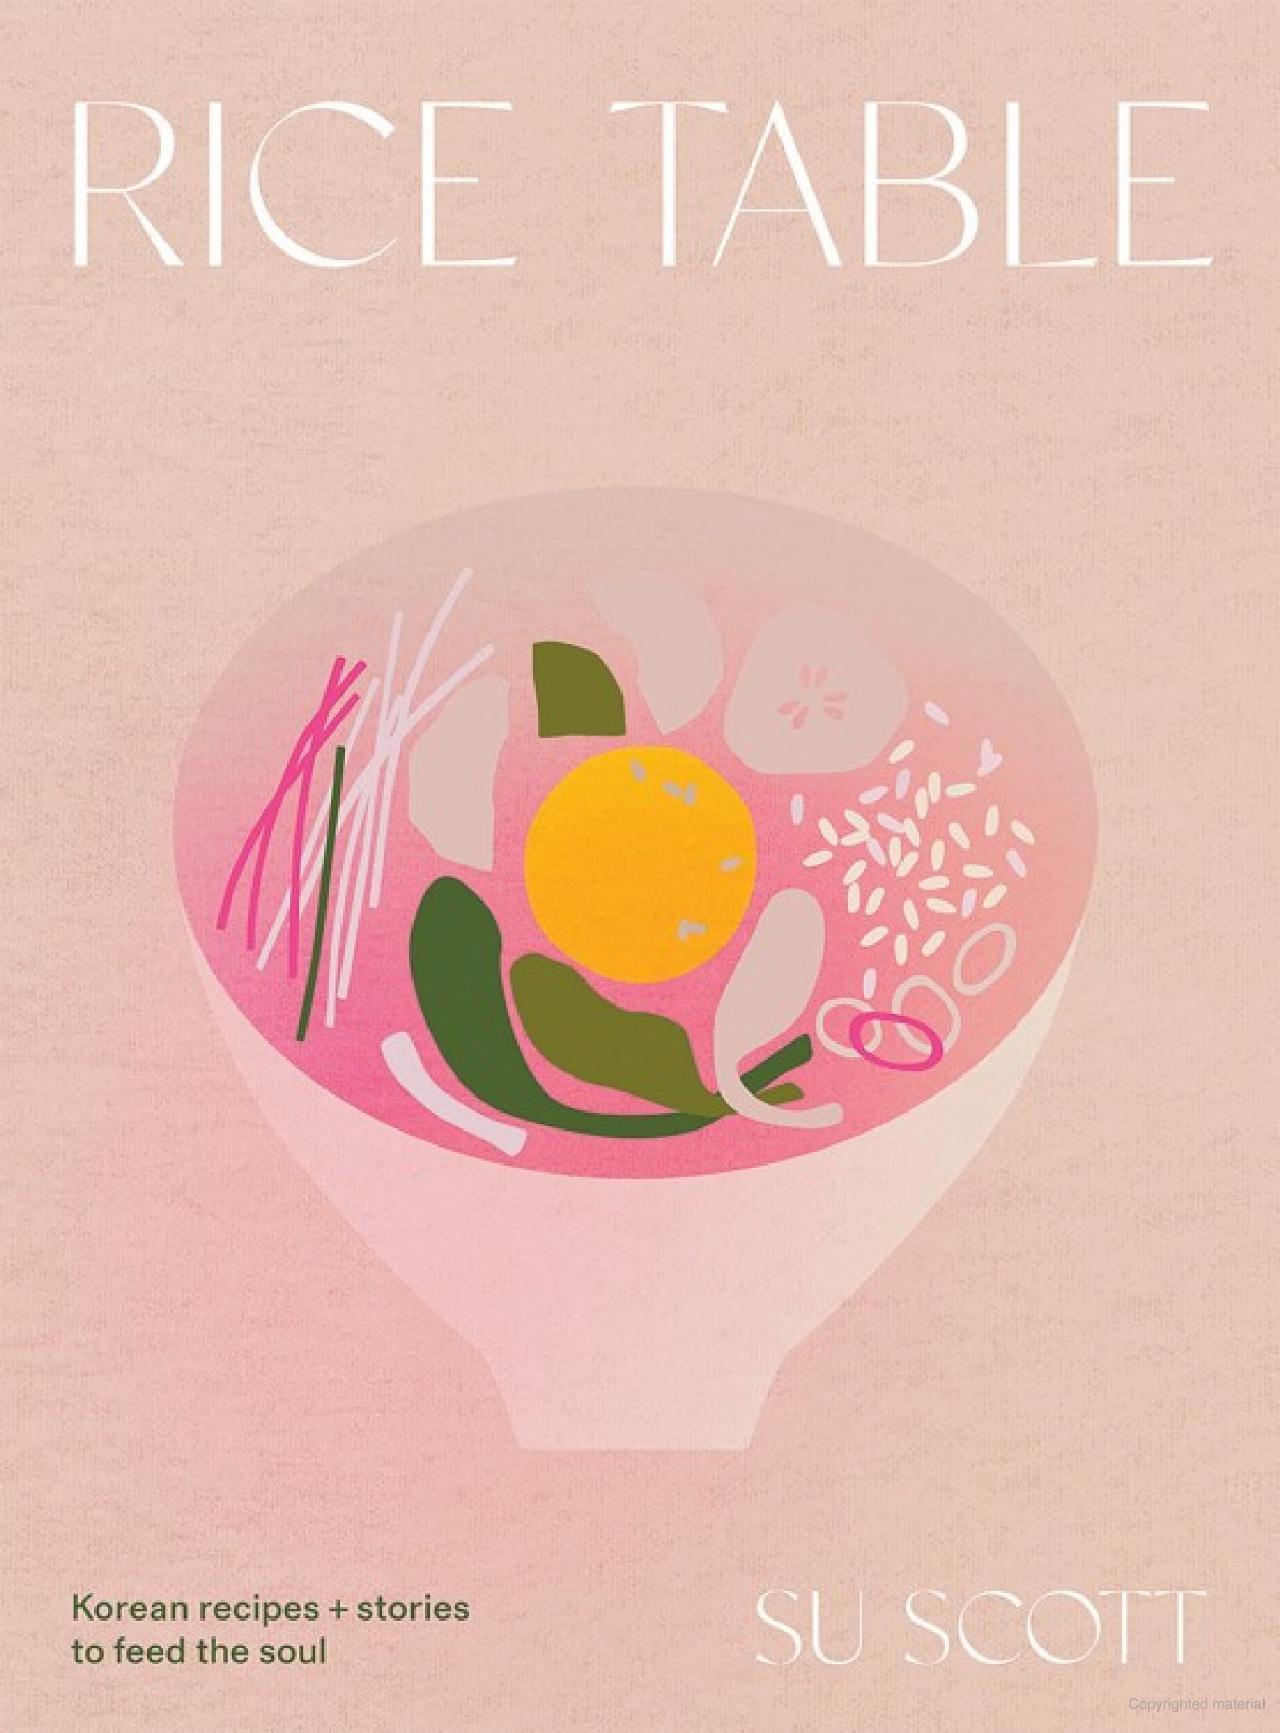 Quadrille Publishing Ltd Rice Table Korean Recipes and Stories Book by Su Scott